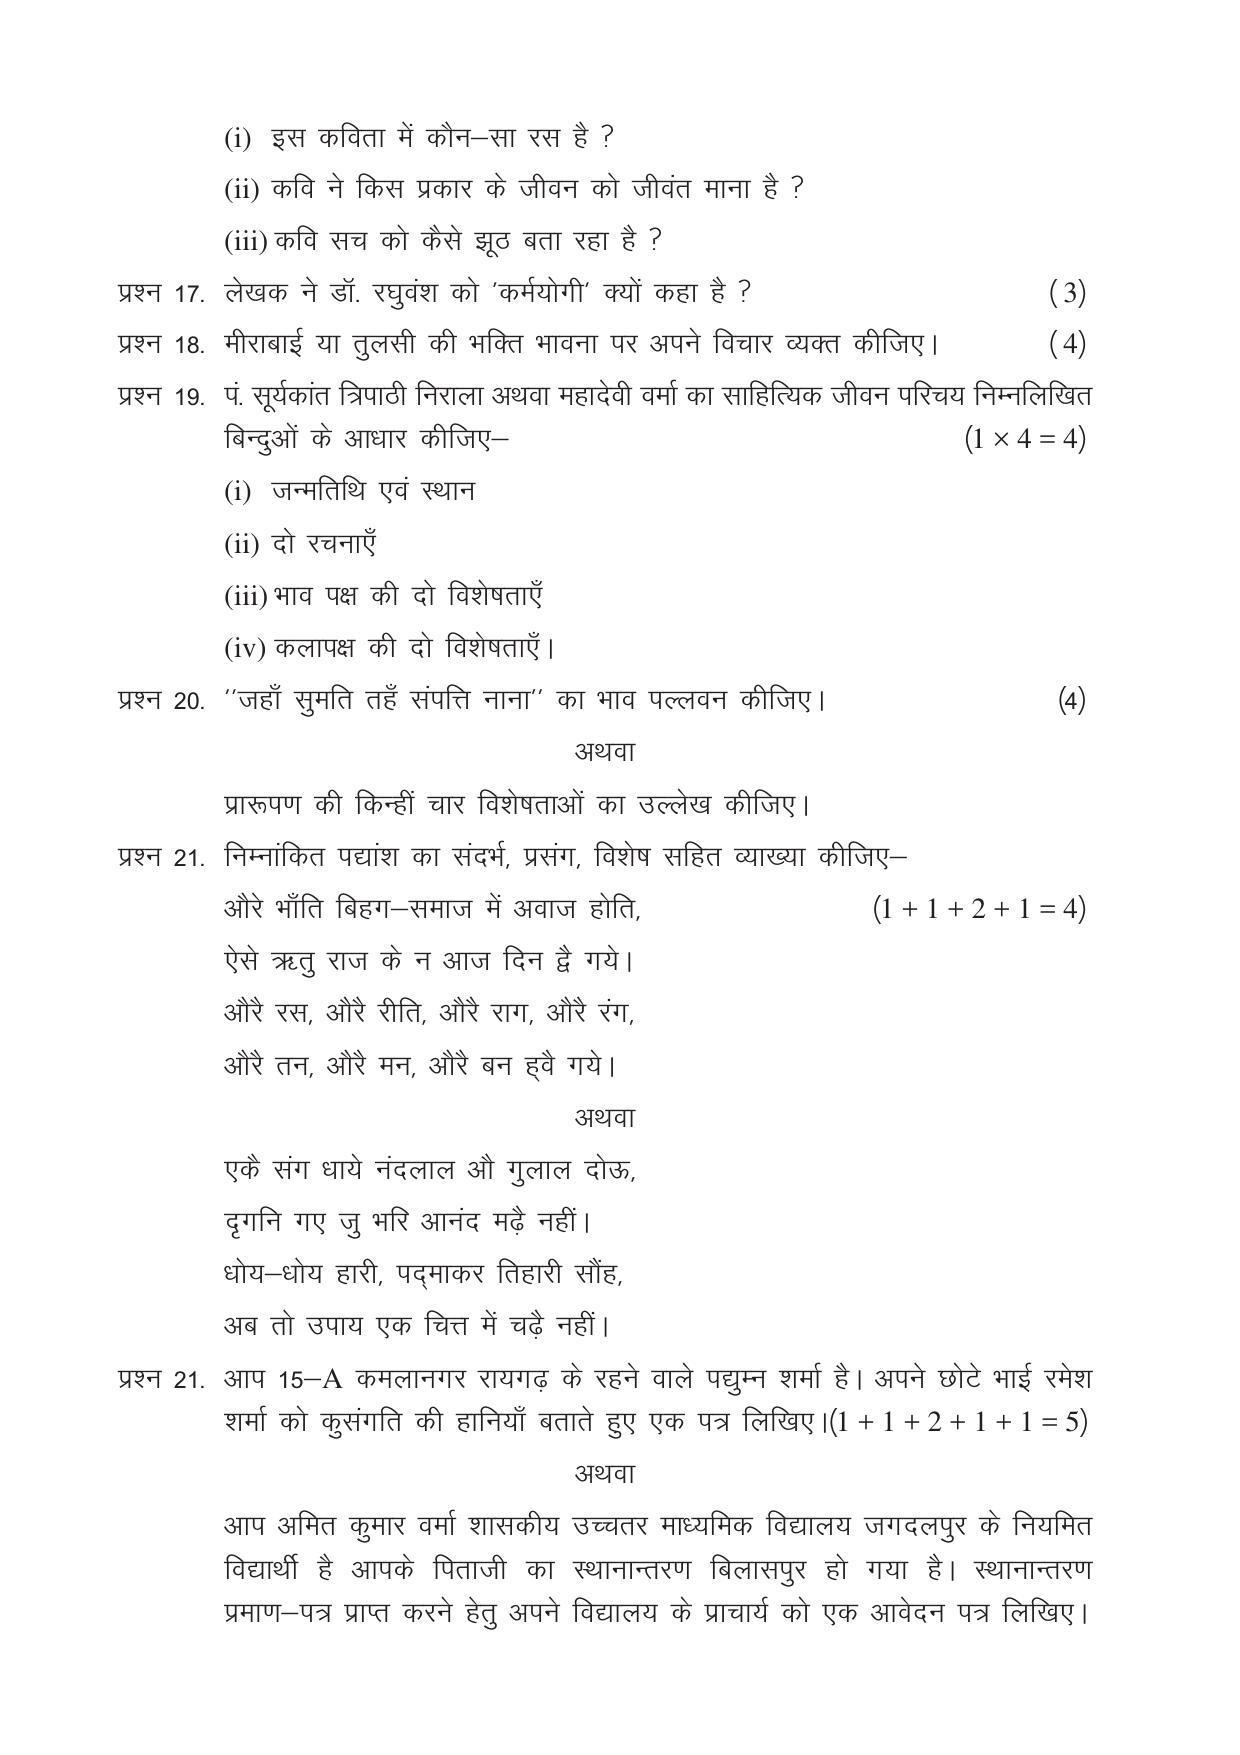 CGSOS Class 12 Model Question Paper - Hindi - II - Page 4